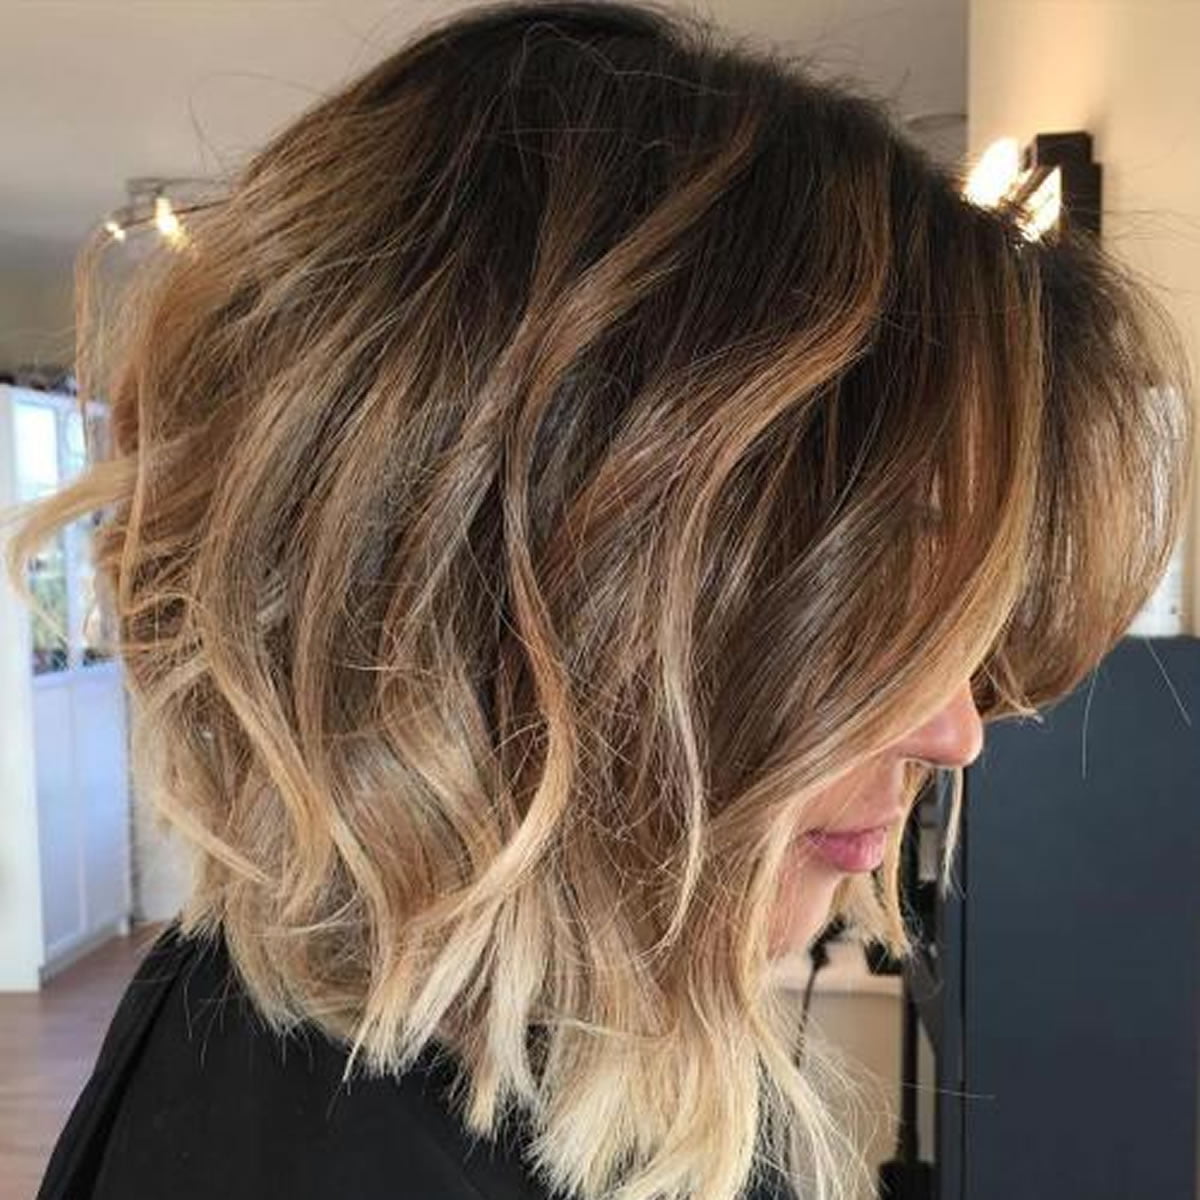 Long bob haircuts ideas that will bring beauty to your beauty – HAIRSTYLES